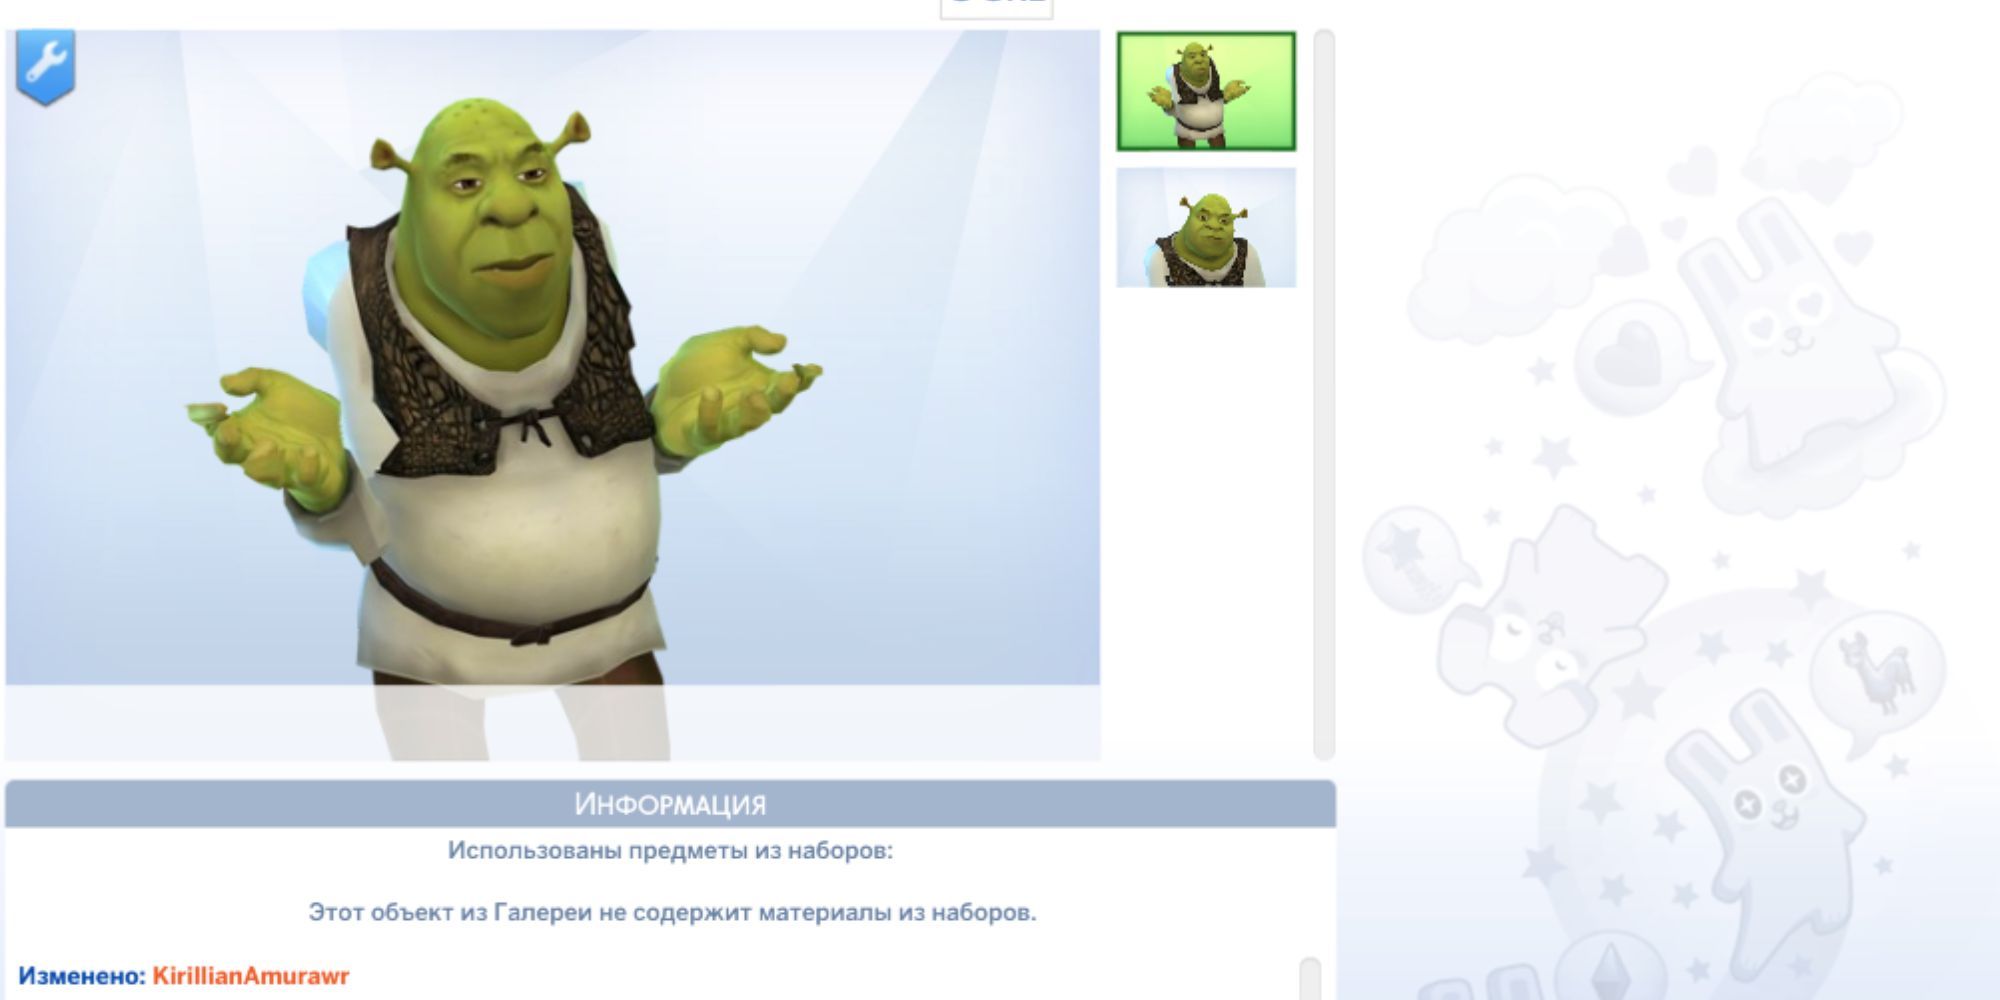 The Sims 4 Shrek The Ogre In The Game